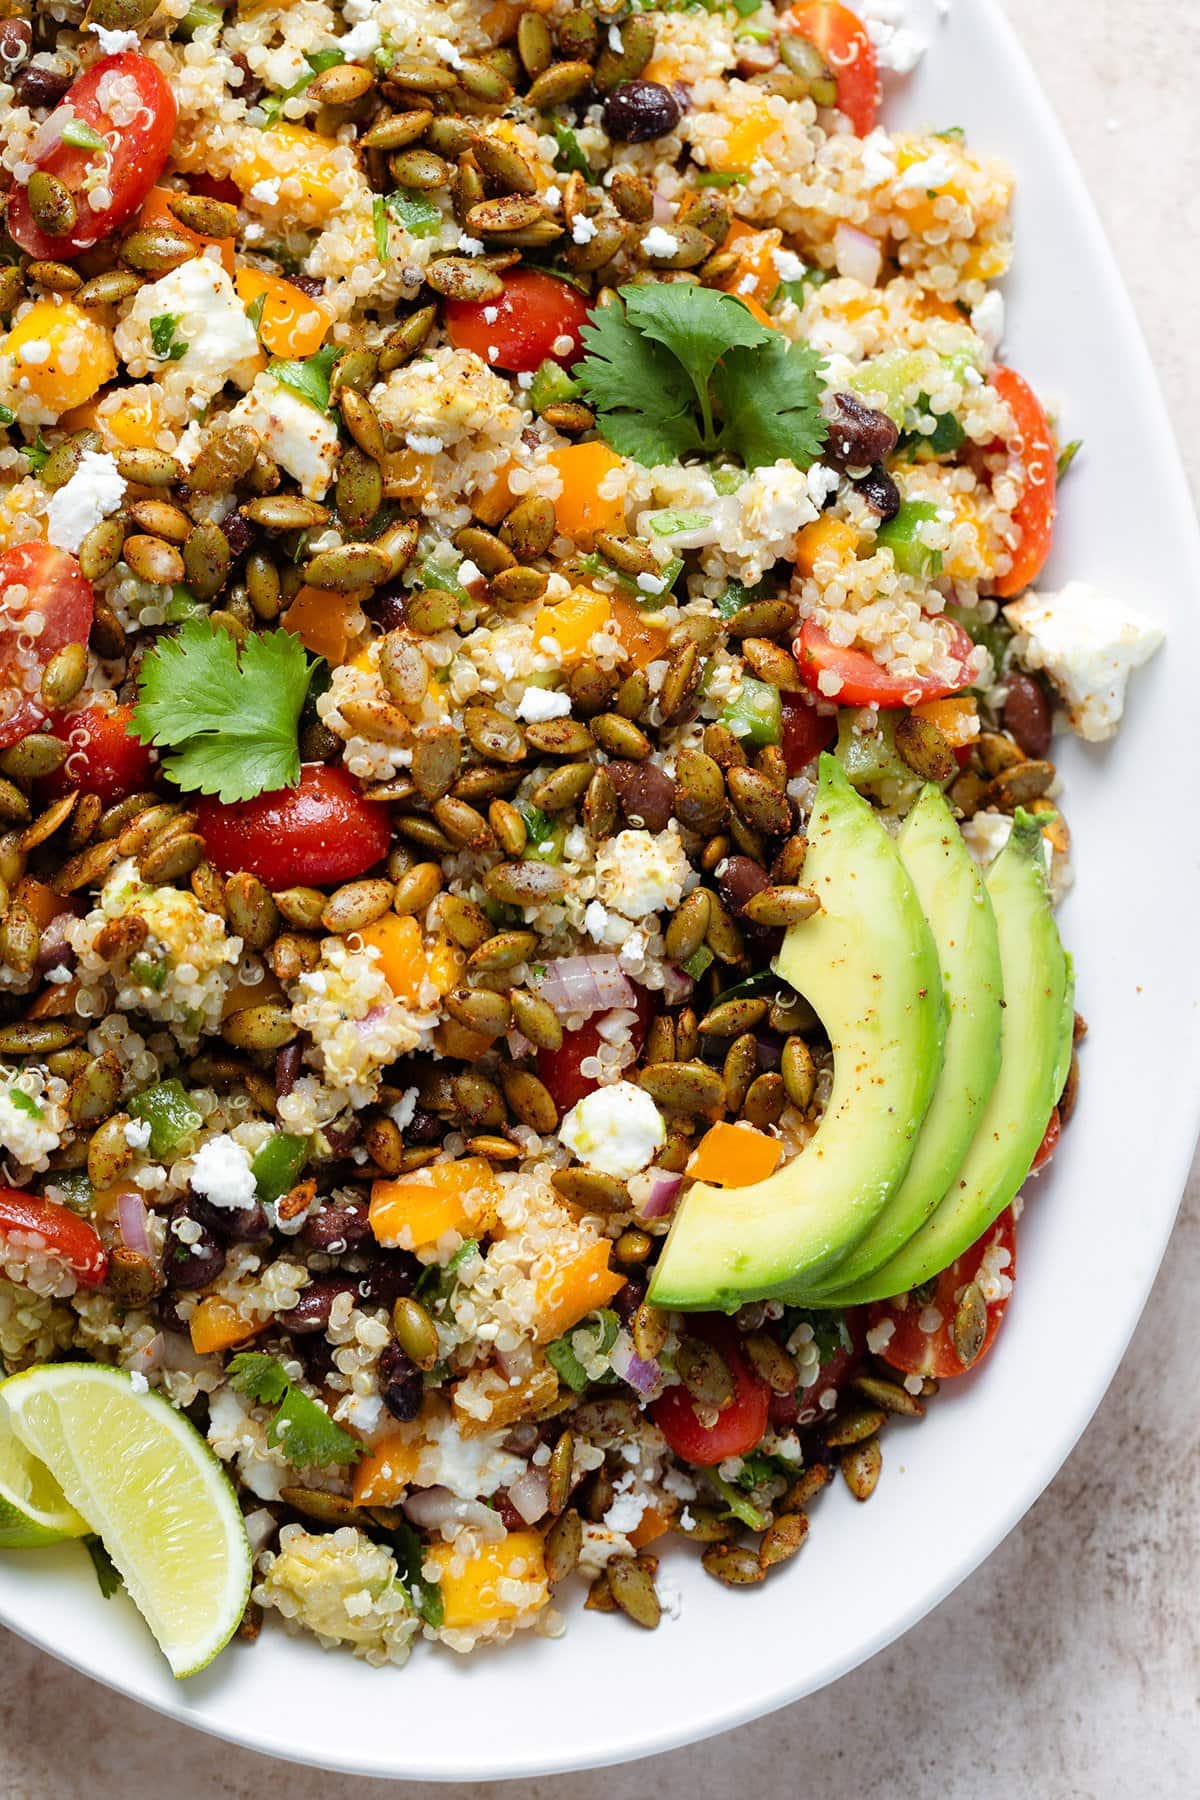 Mango quinoa salad topped with avocado slices on a large serving plate.